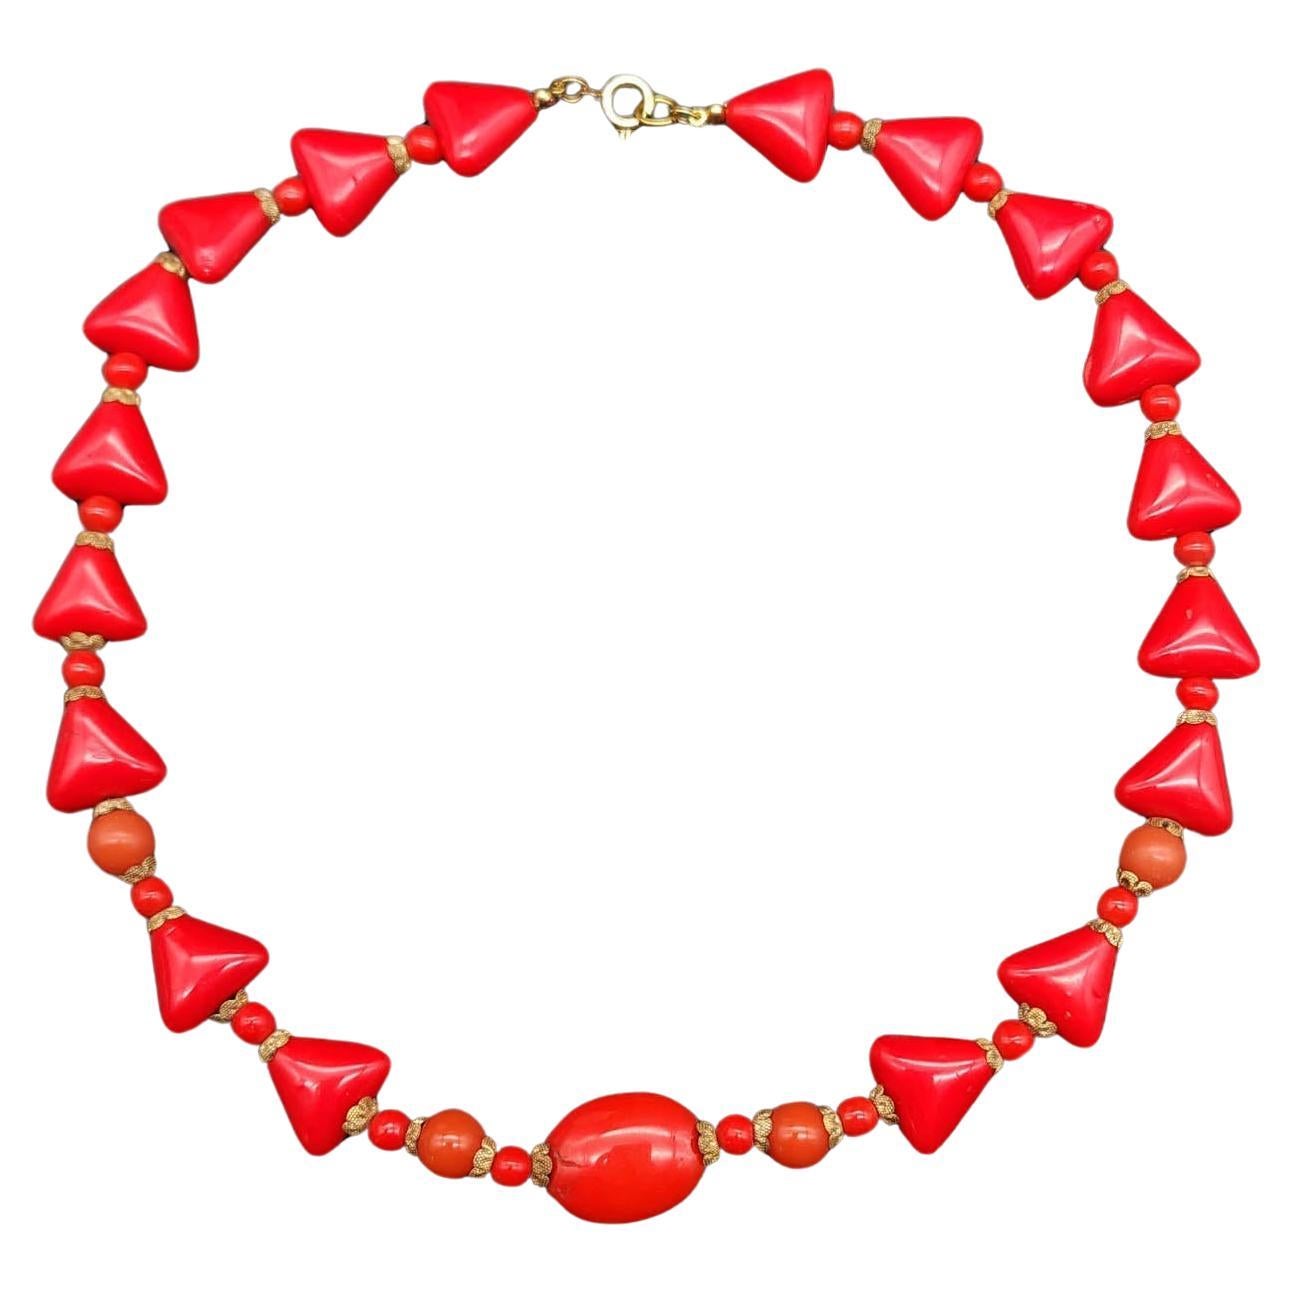 Chic Red Lucite Bead Necklace, Triangle & Round Beads Gold-Filled Clasp, Vintage For Sale